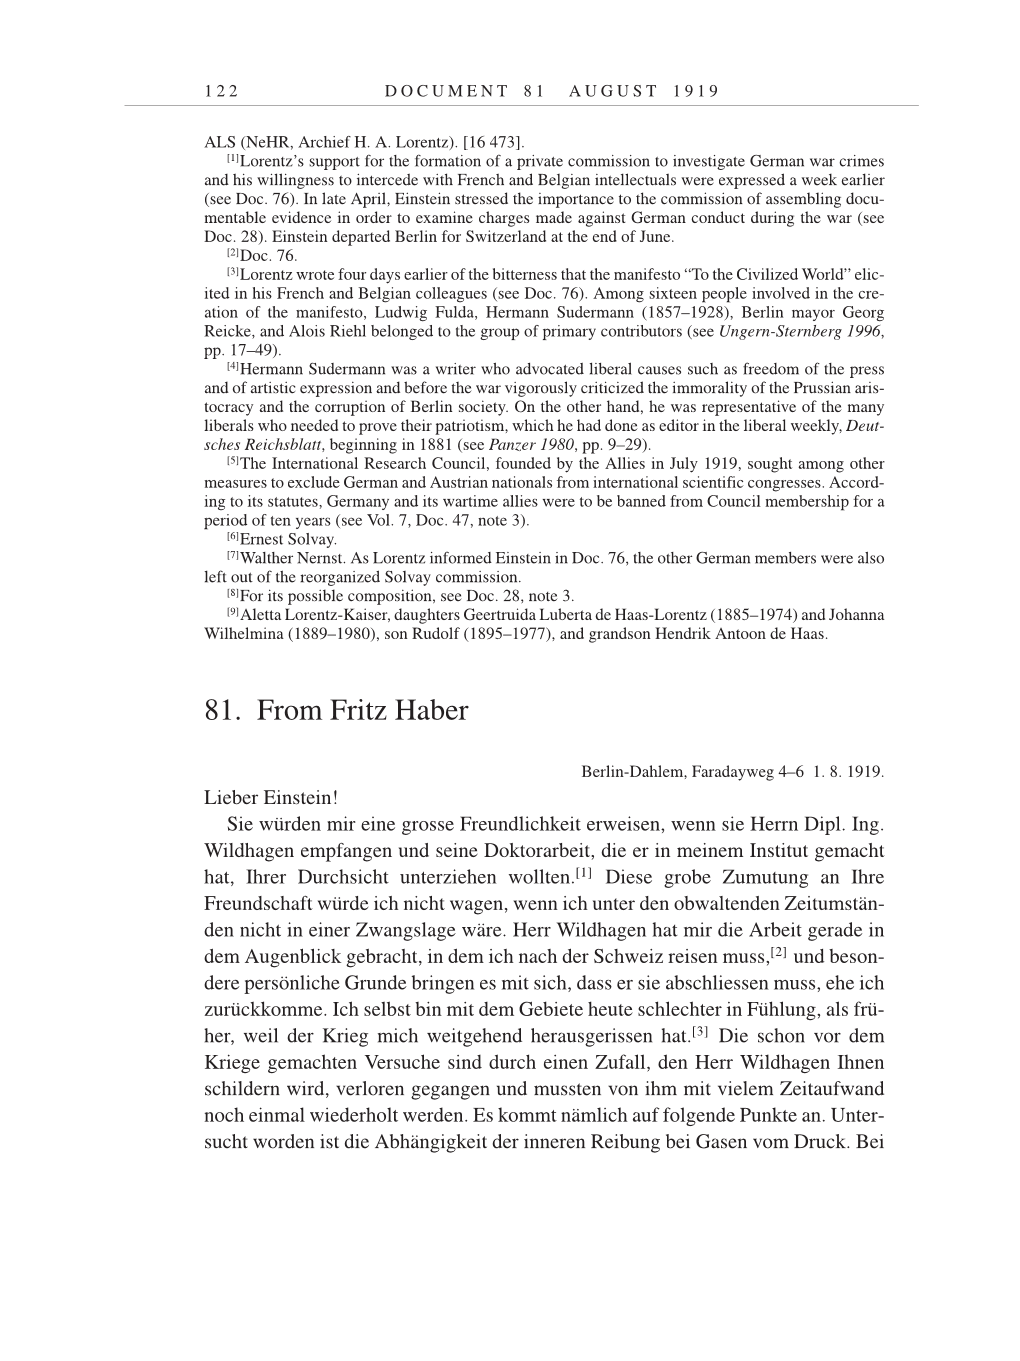 Volume 9: The Berlin Years: Correspondence January 1919-April 1920 page 122